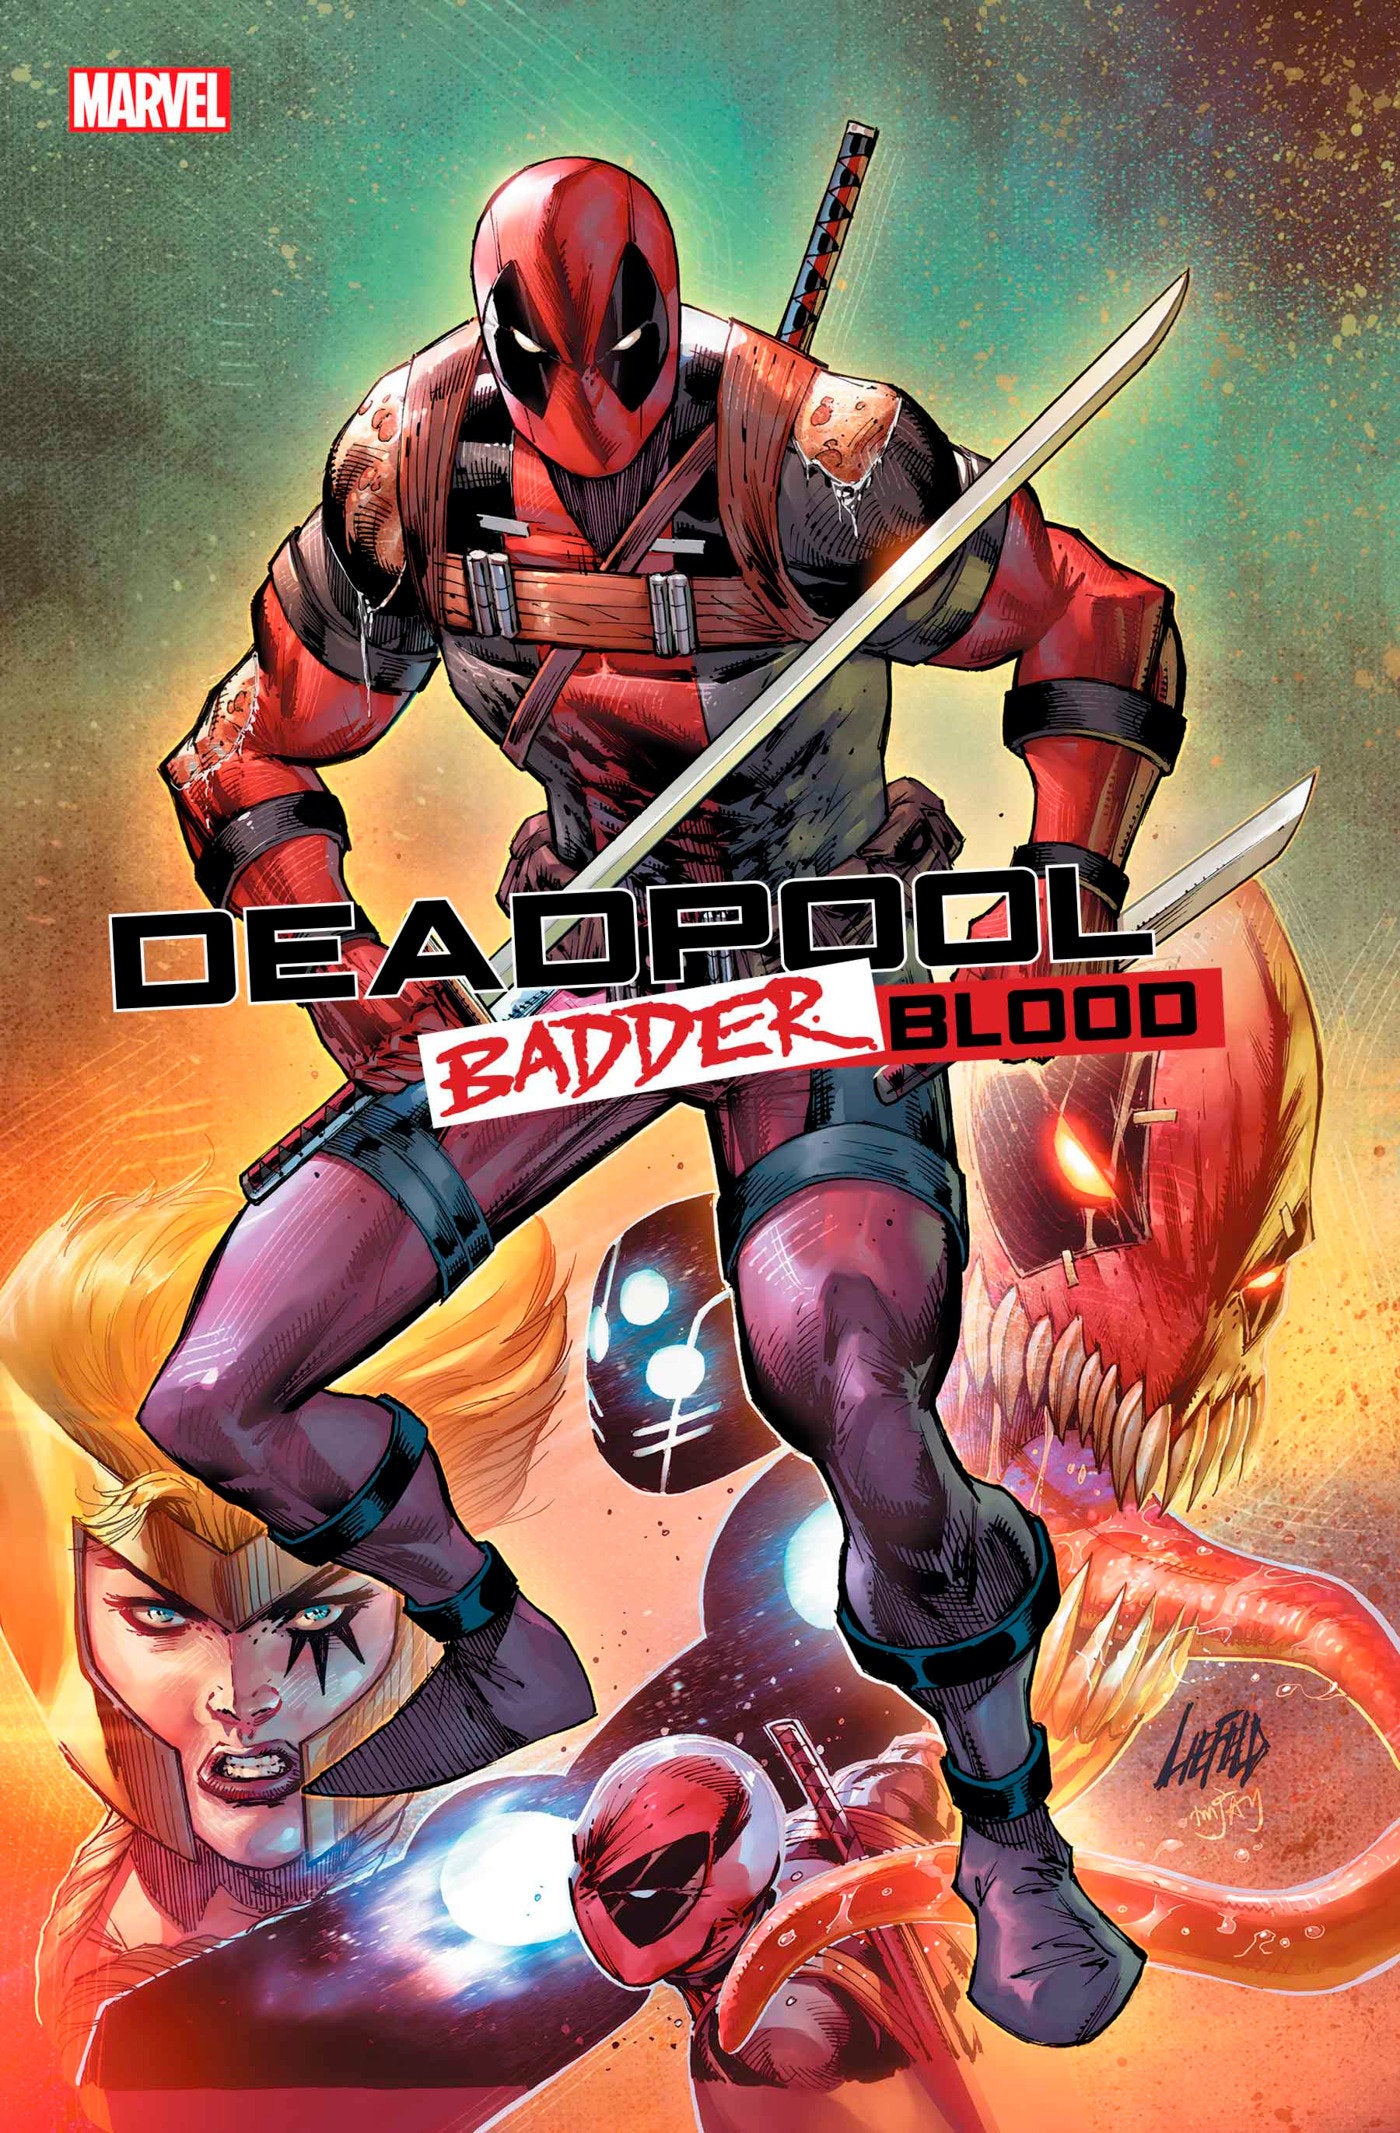 Stock Photo of Deadpool: Badder Blood 2 comic sold by Stronghold Collectibles